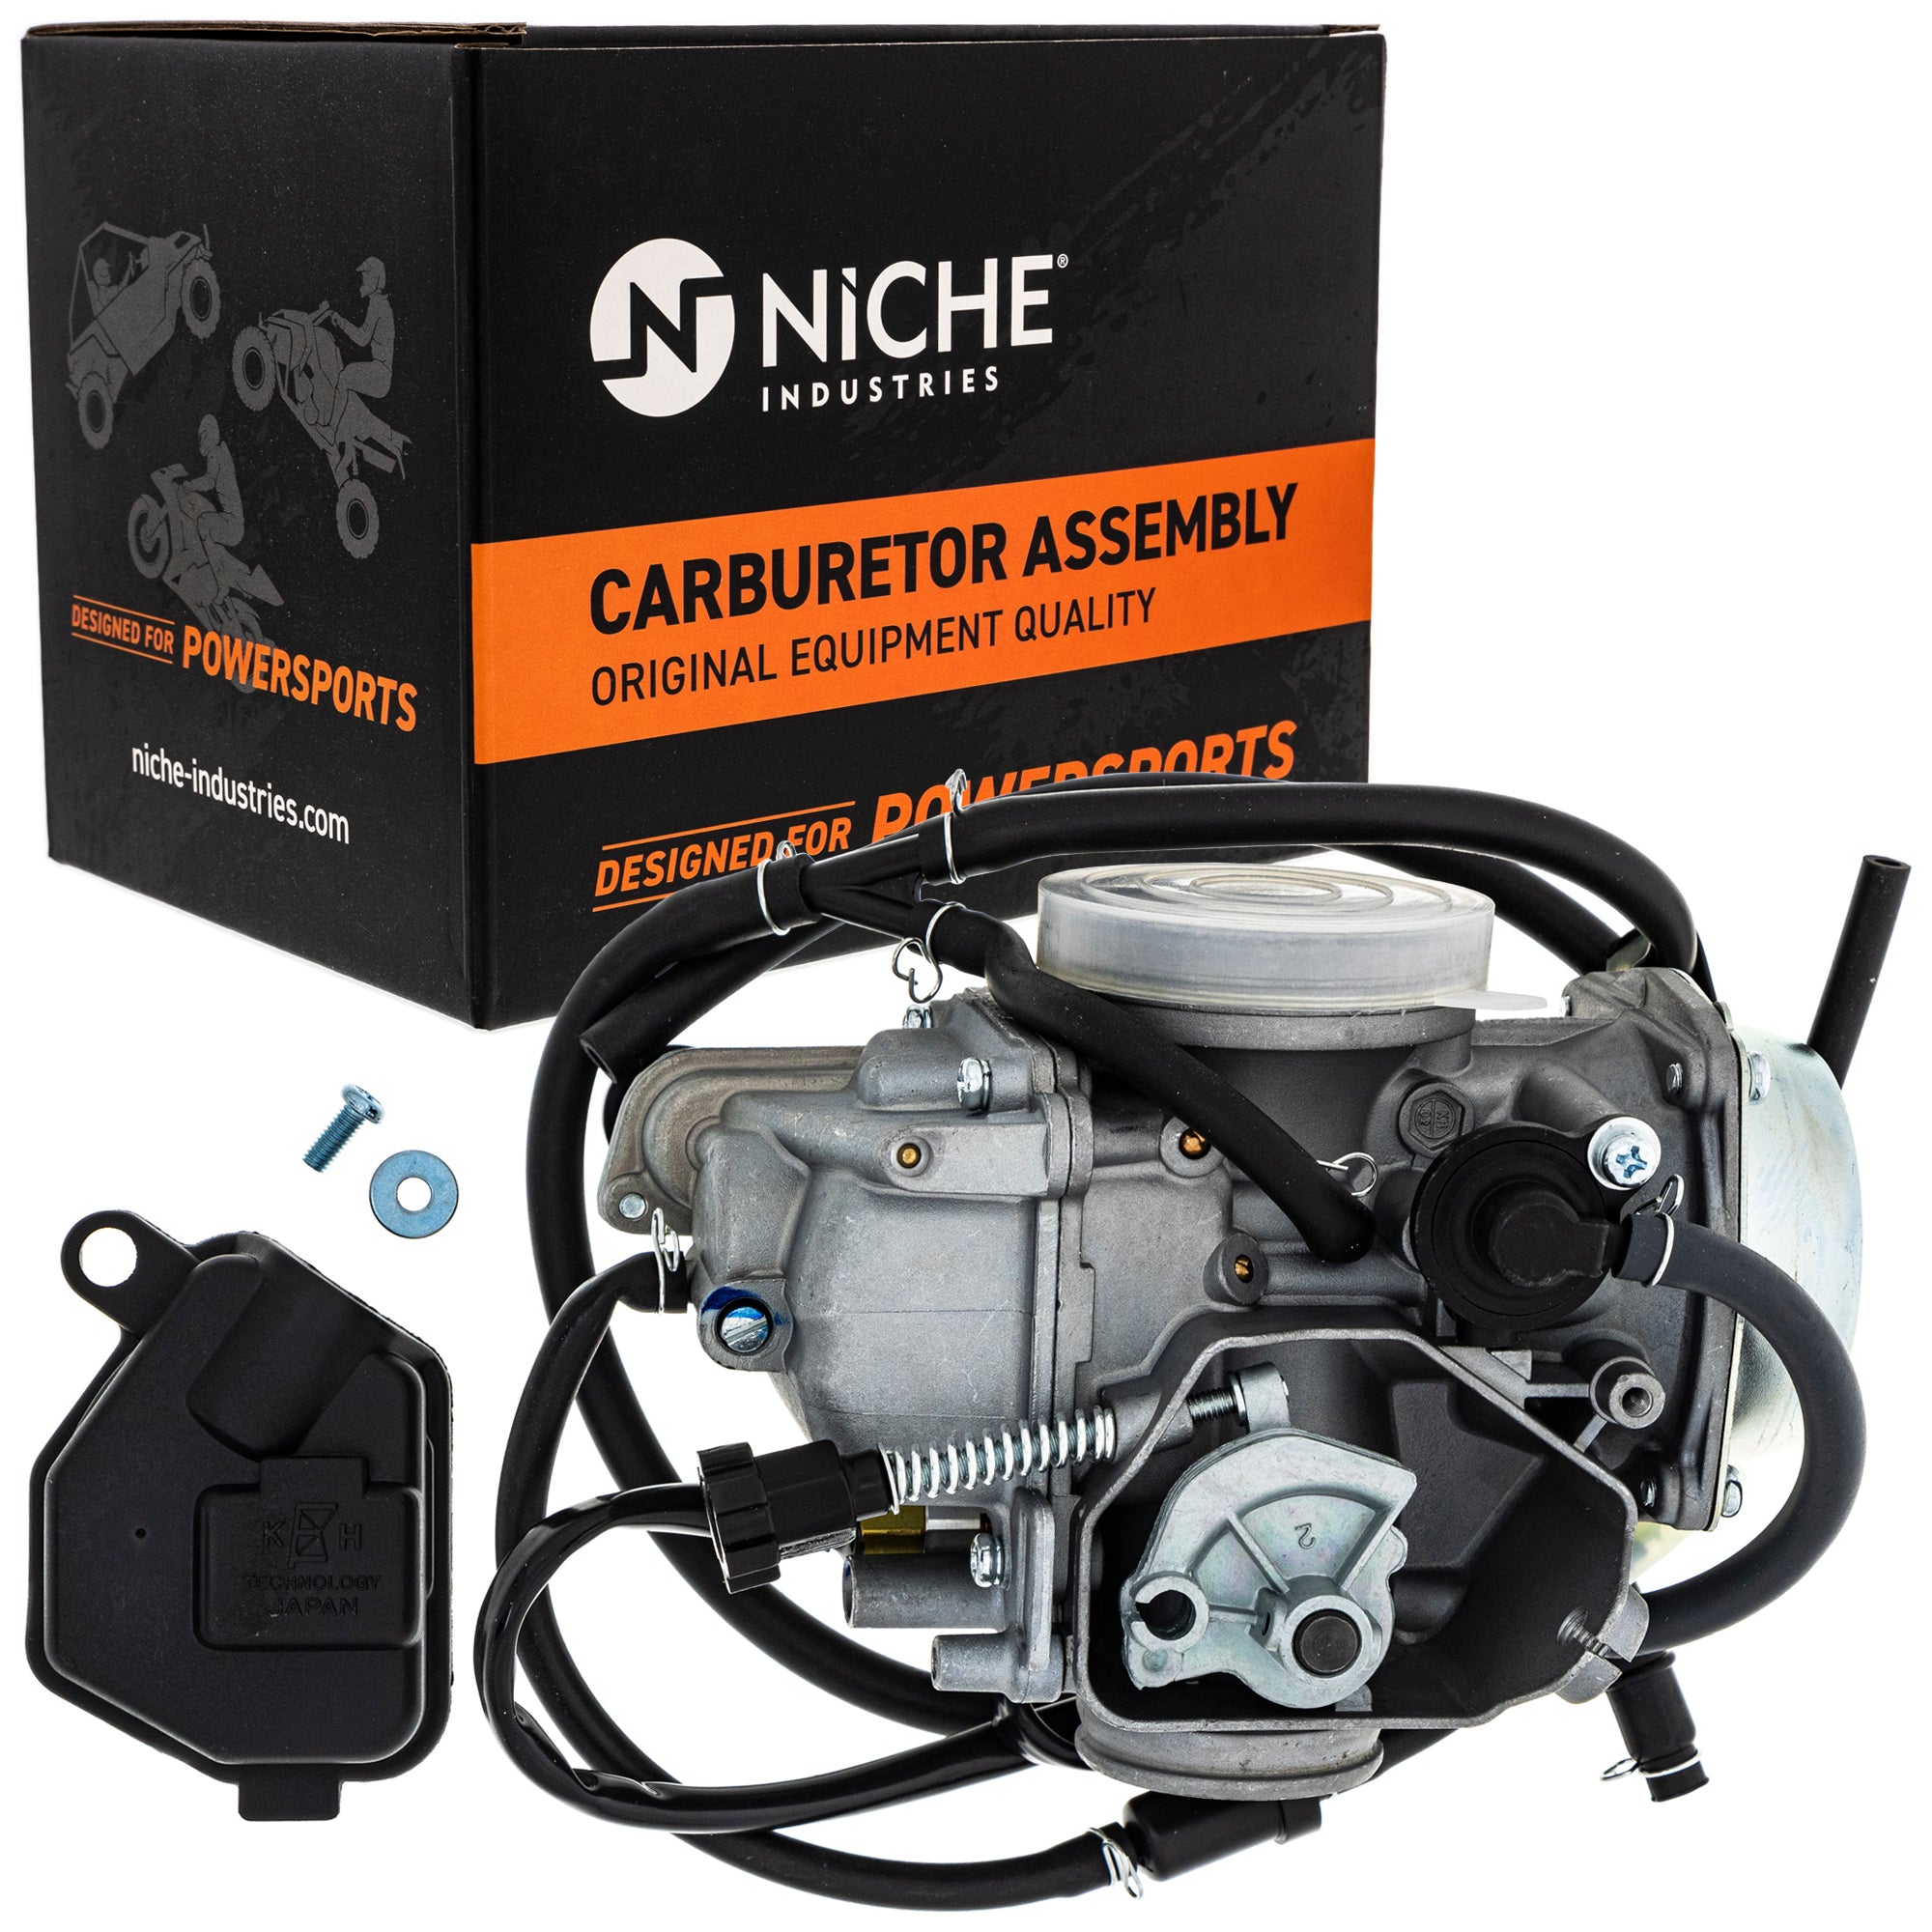 NICHE 519-KCR2259B Carburetor Assembly for zOTHER Honda FourTrax